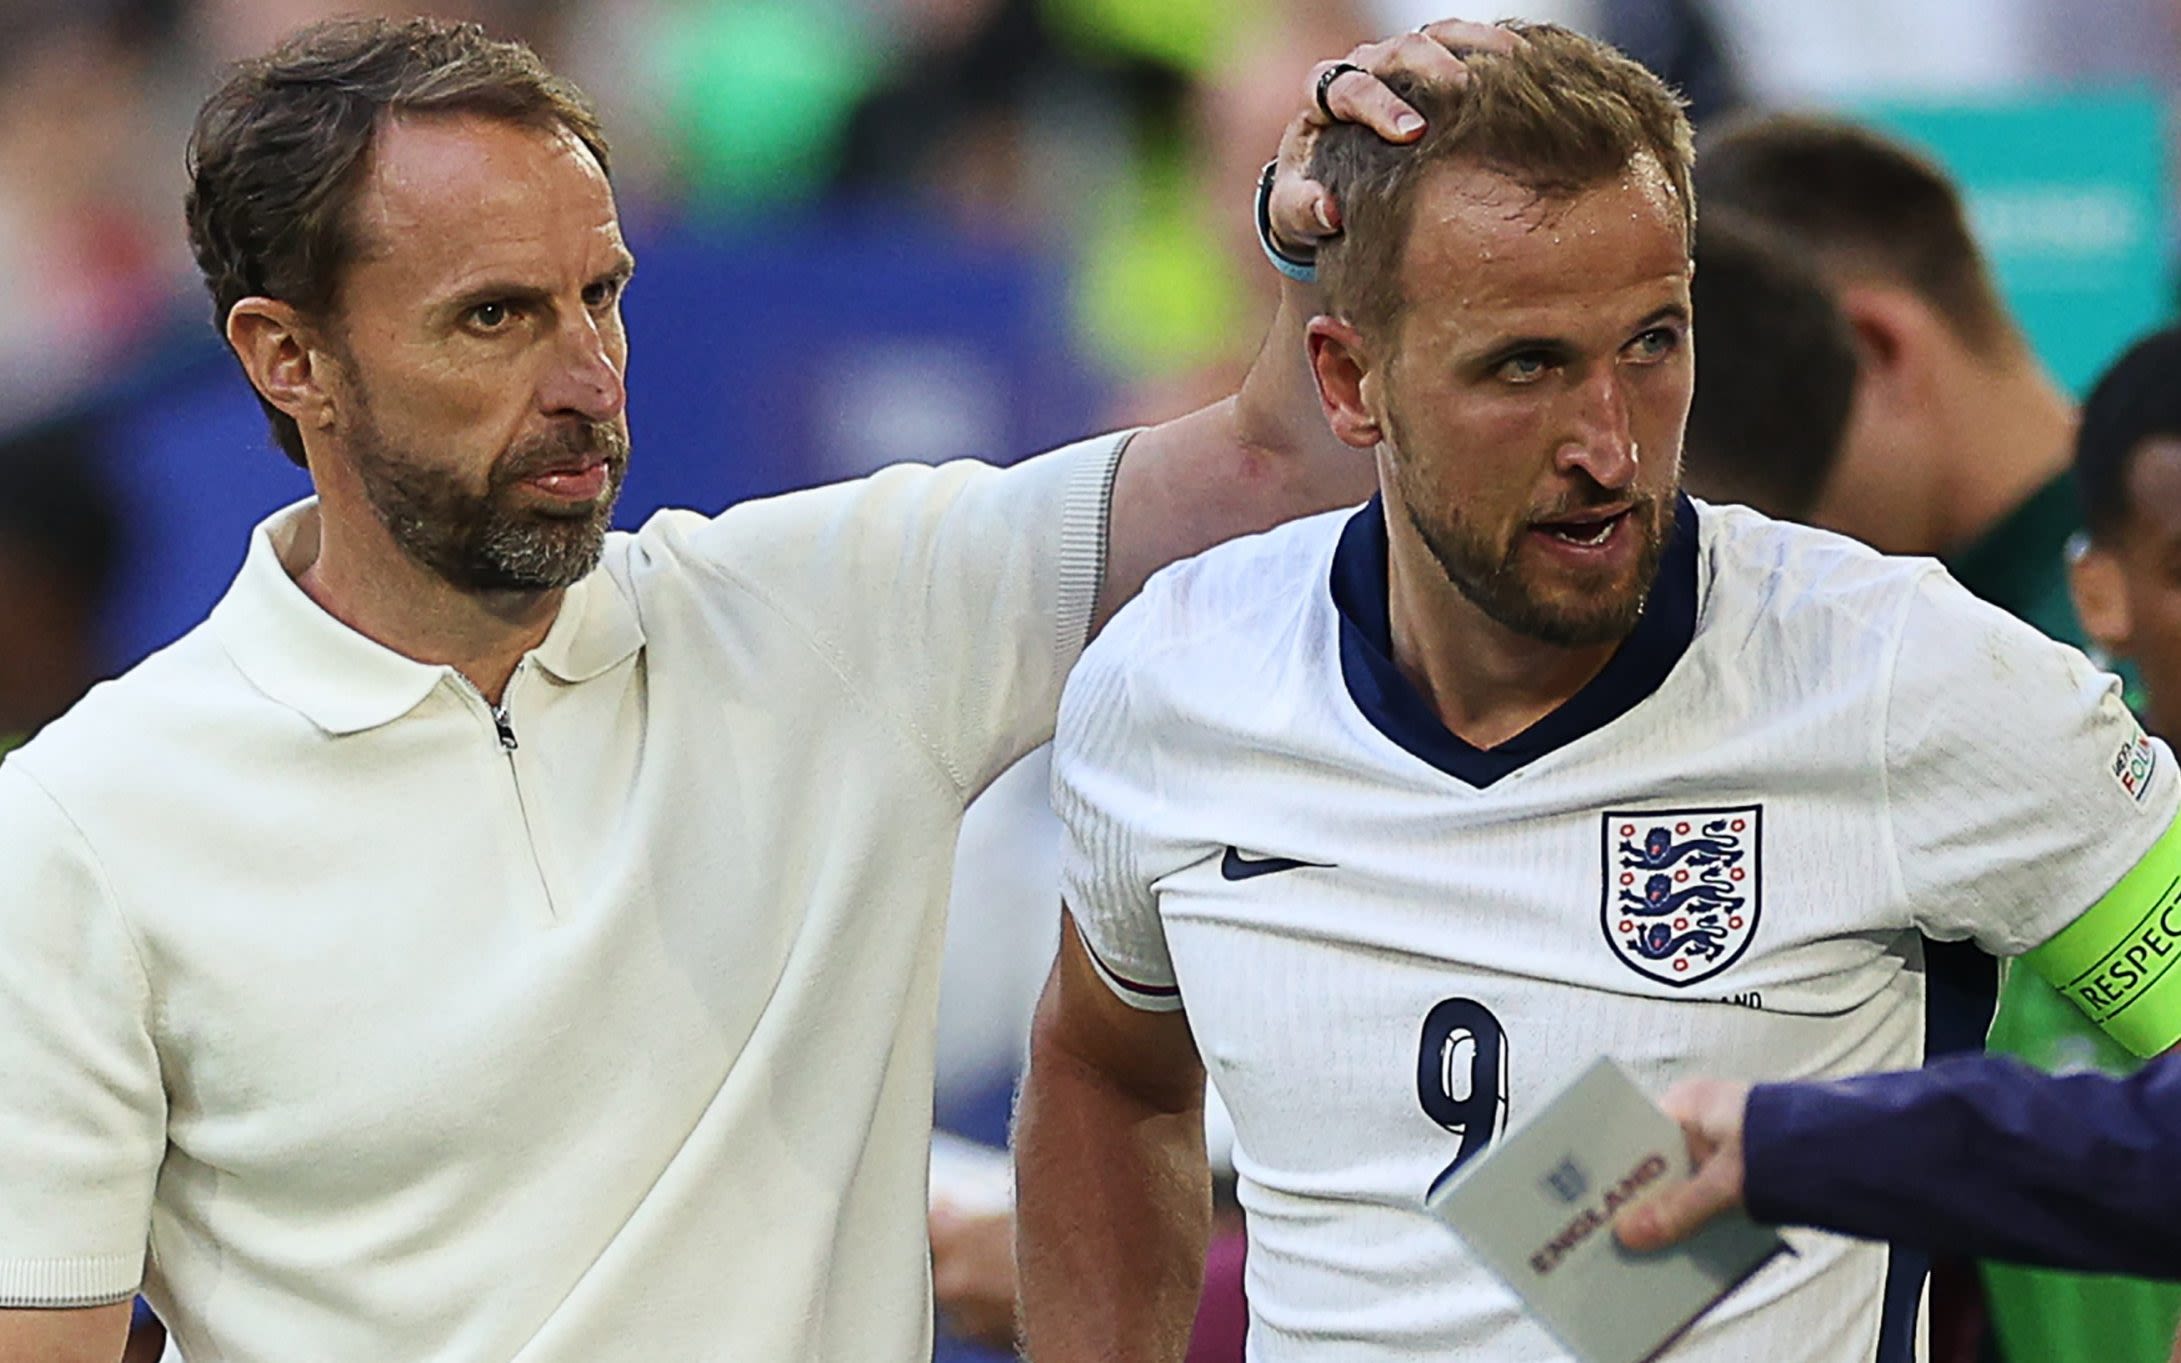 Gareth Southgate hits back: It’s not normal to have beer thrown at you